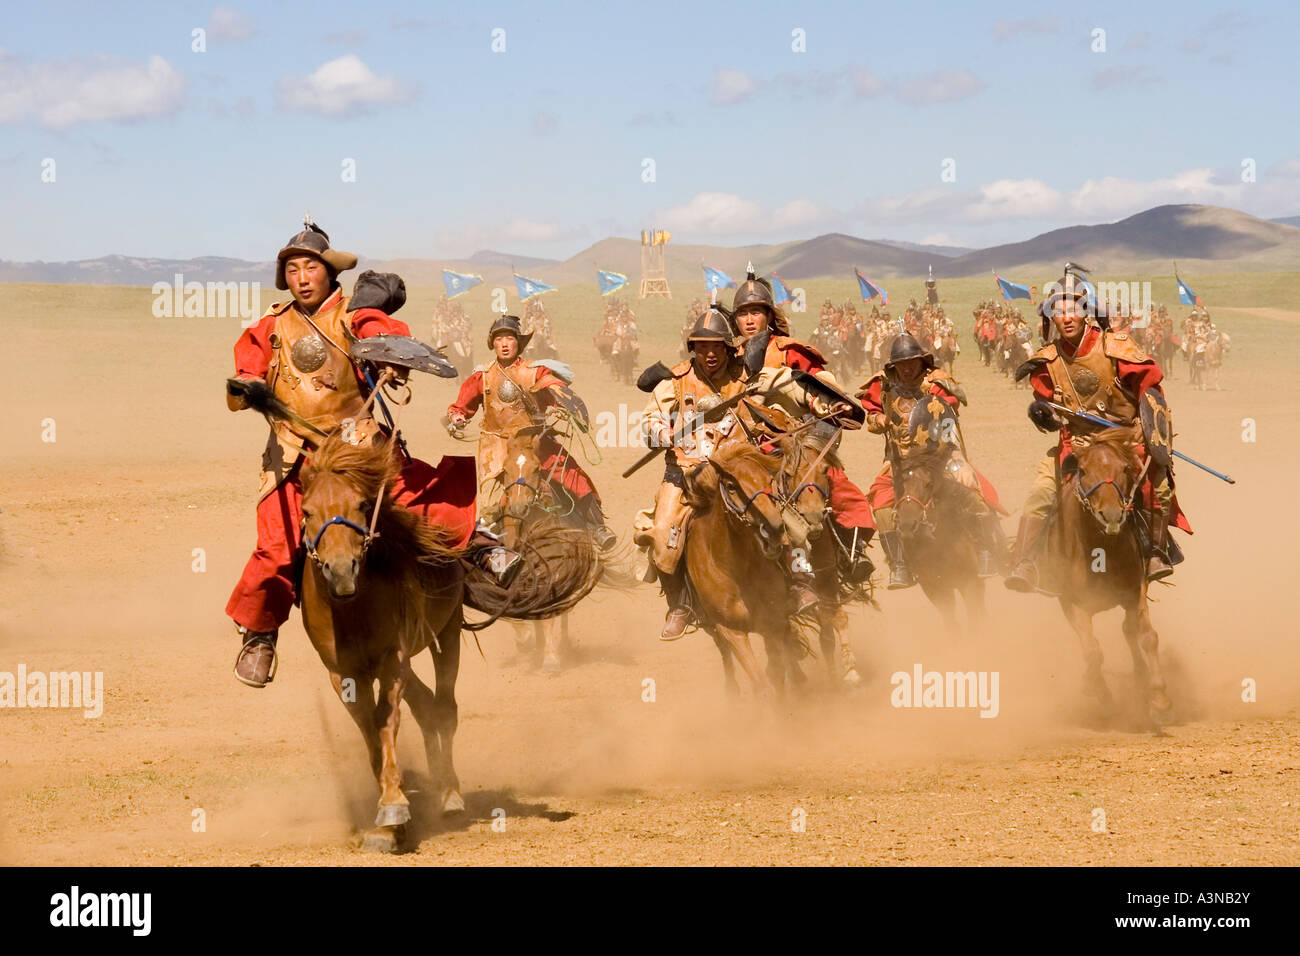 Mongolian armed horsemen charging with spears and shields Stock Photo